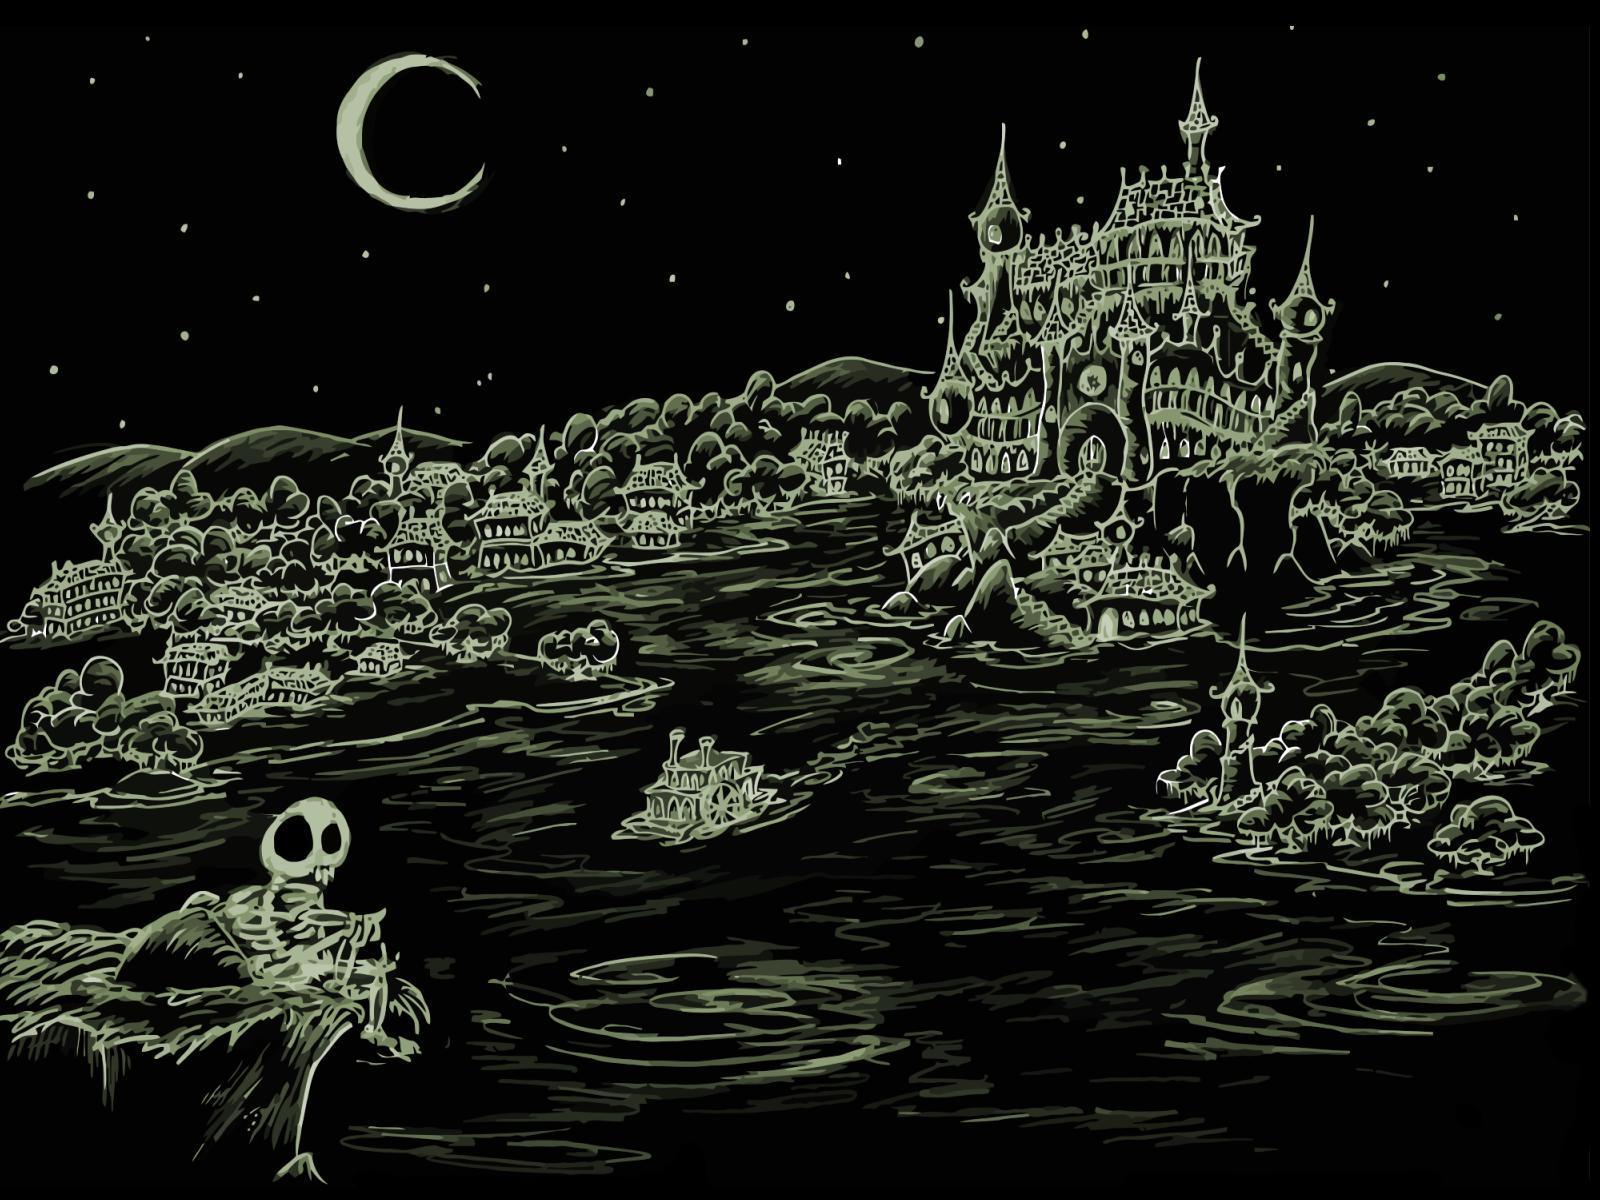 screen background: a skeleton looking over a haunted bay